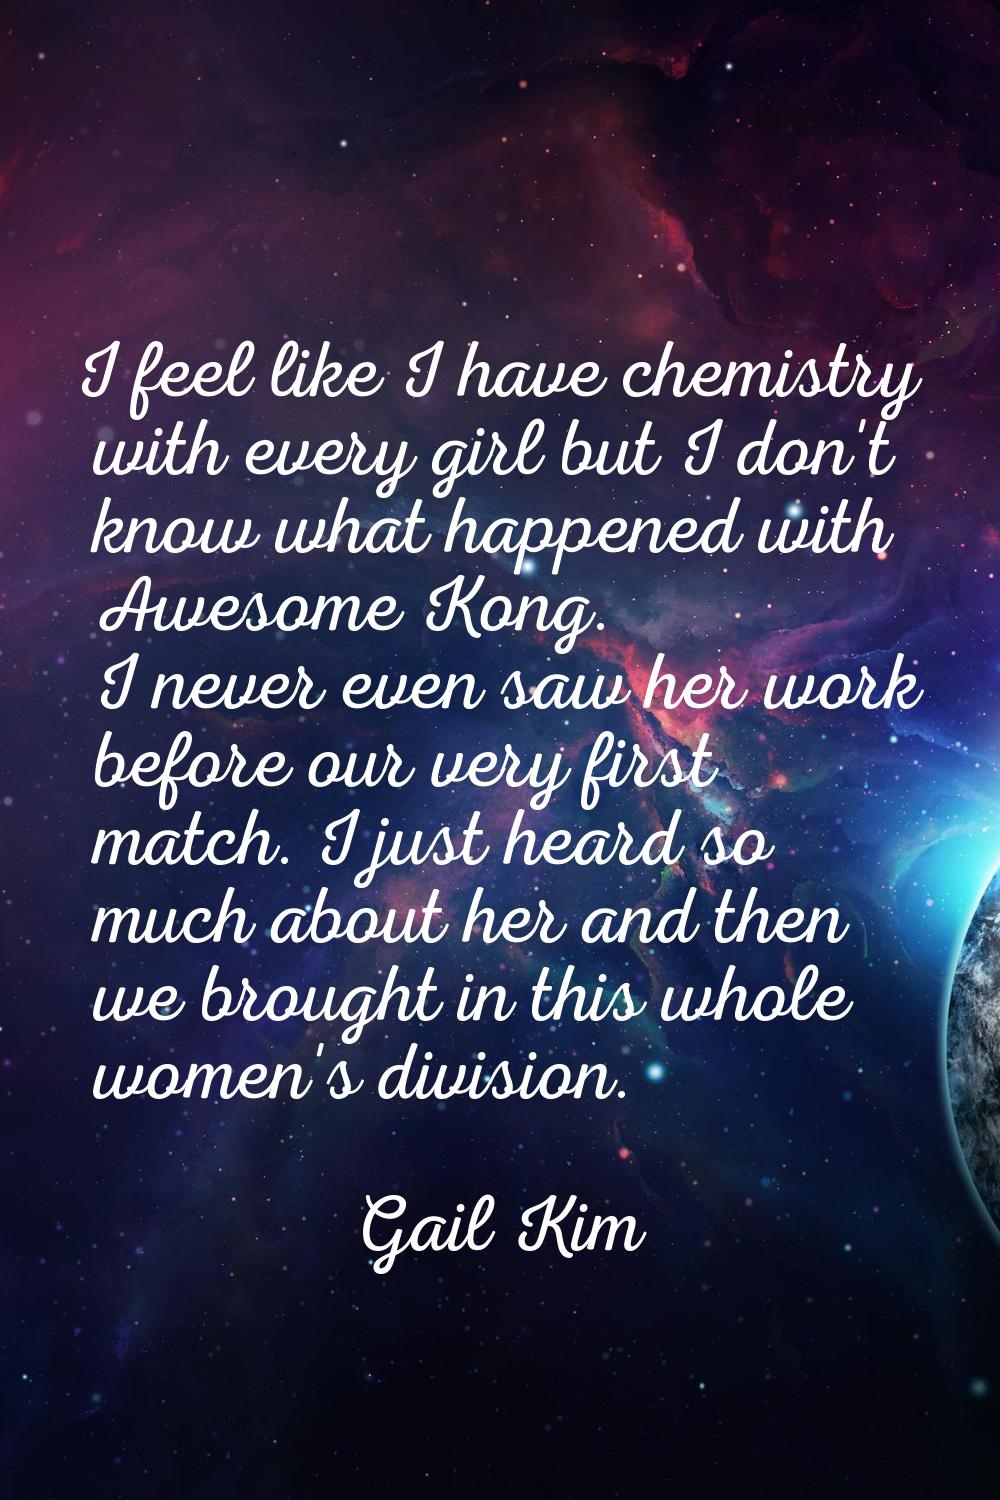 I feel like I have chemistry with every girl but I don't know what happened with Awesome Kong. I ne